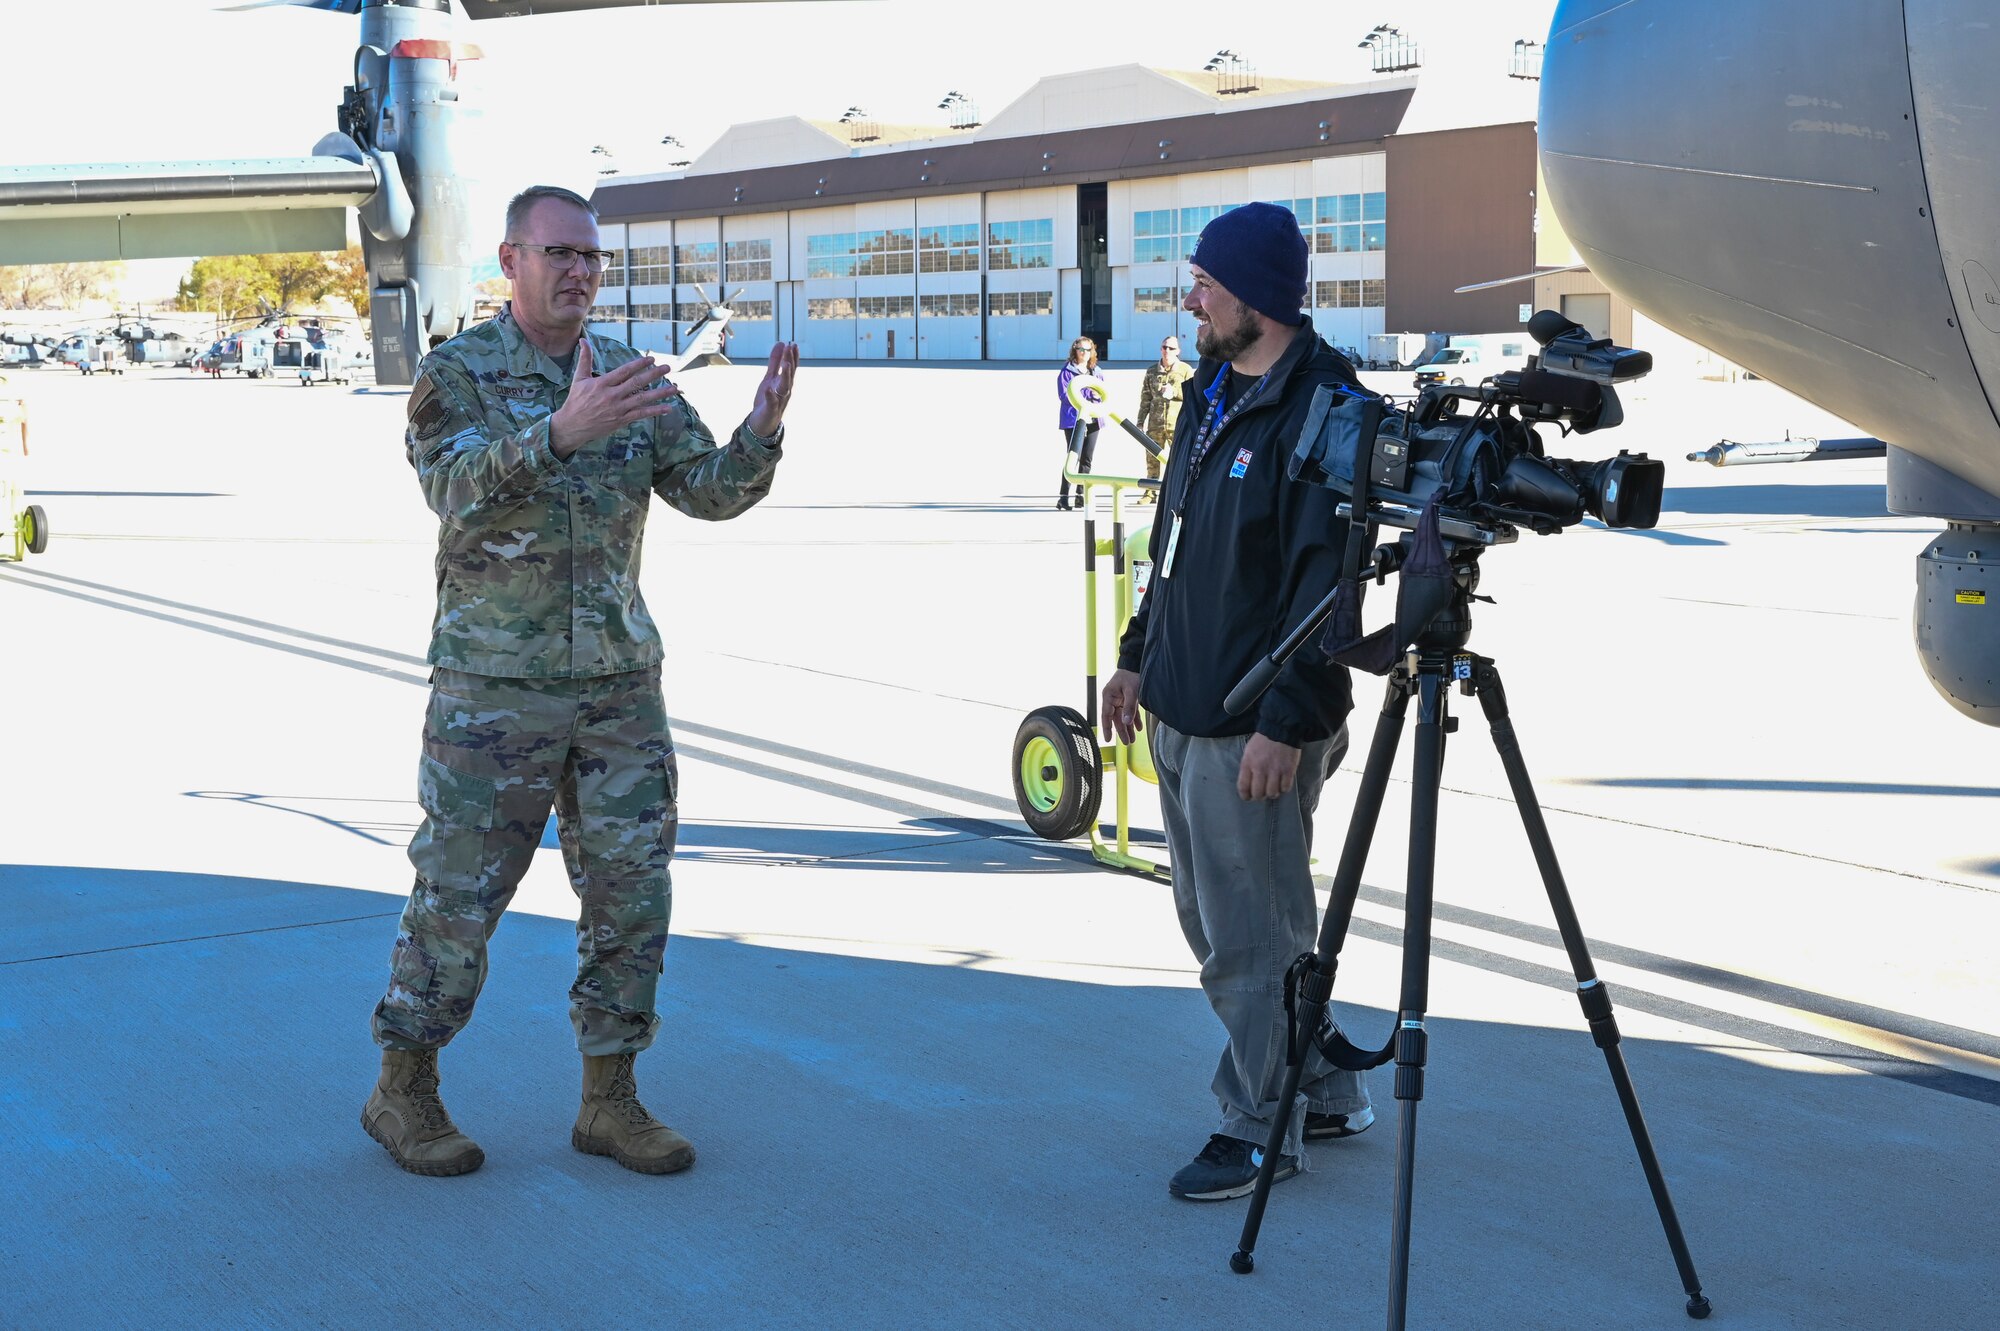 Local news media representatives visit the 58th SOW and NMANG 150th SOW to capture photo images and video footage at Kirtland Air Force Base, N.M., Nov. 29, 2021.